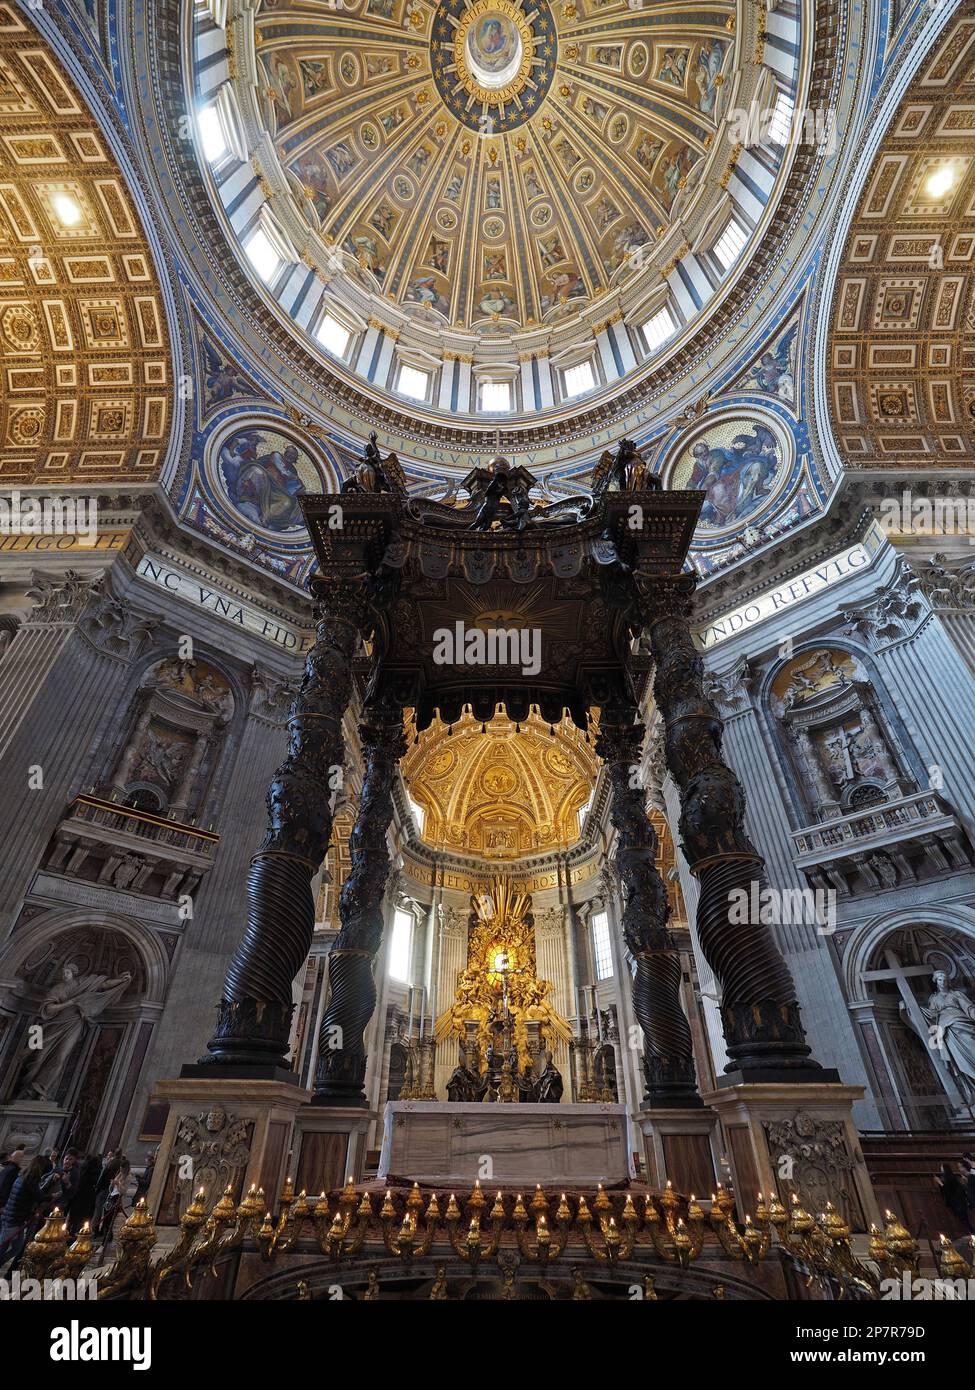 The huge bronze altar in Saint Peters Basilica in the Vatican. It is exactly over the spot where Saint Peter was buried. Stock Photo